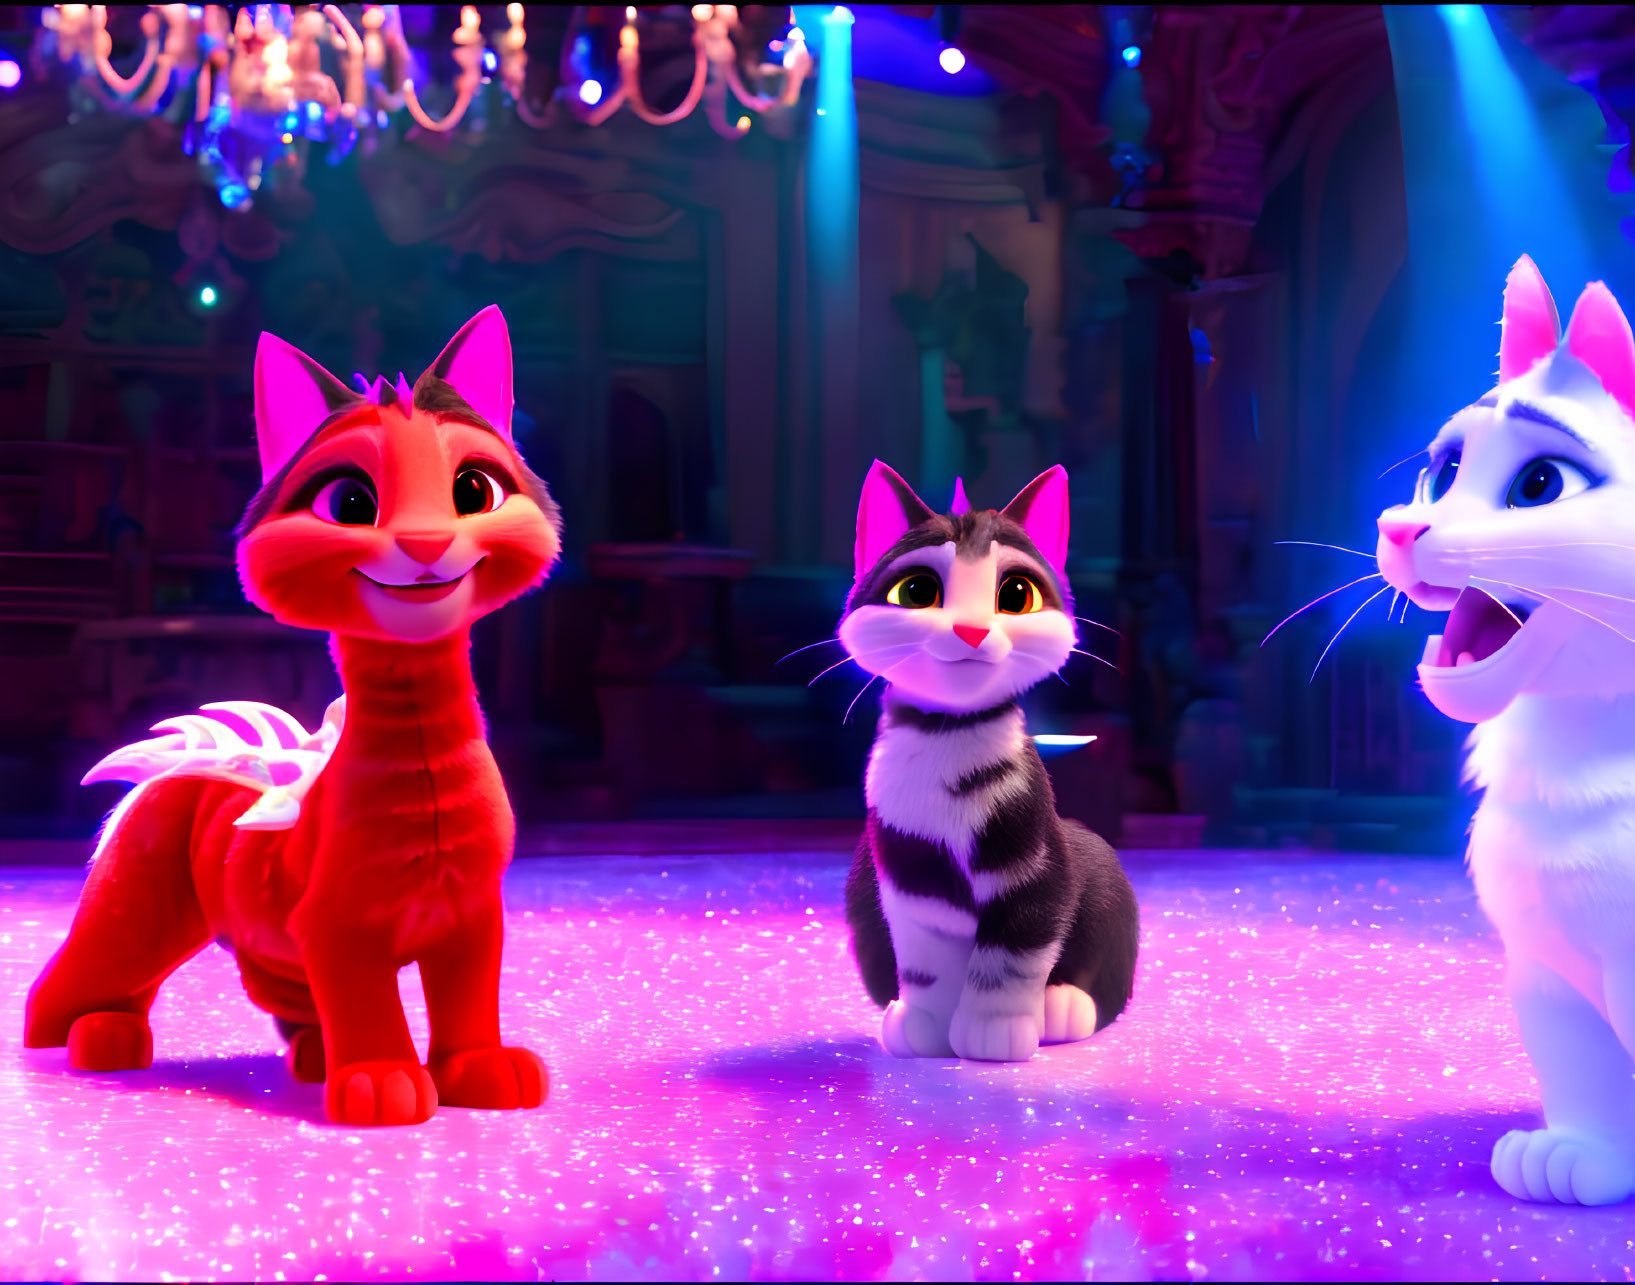 Three expressive animated cats on glittery floor with ornate theater backdrop.